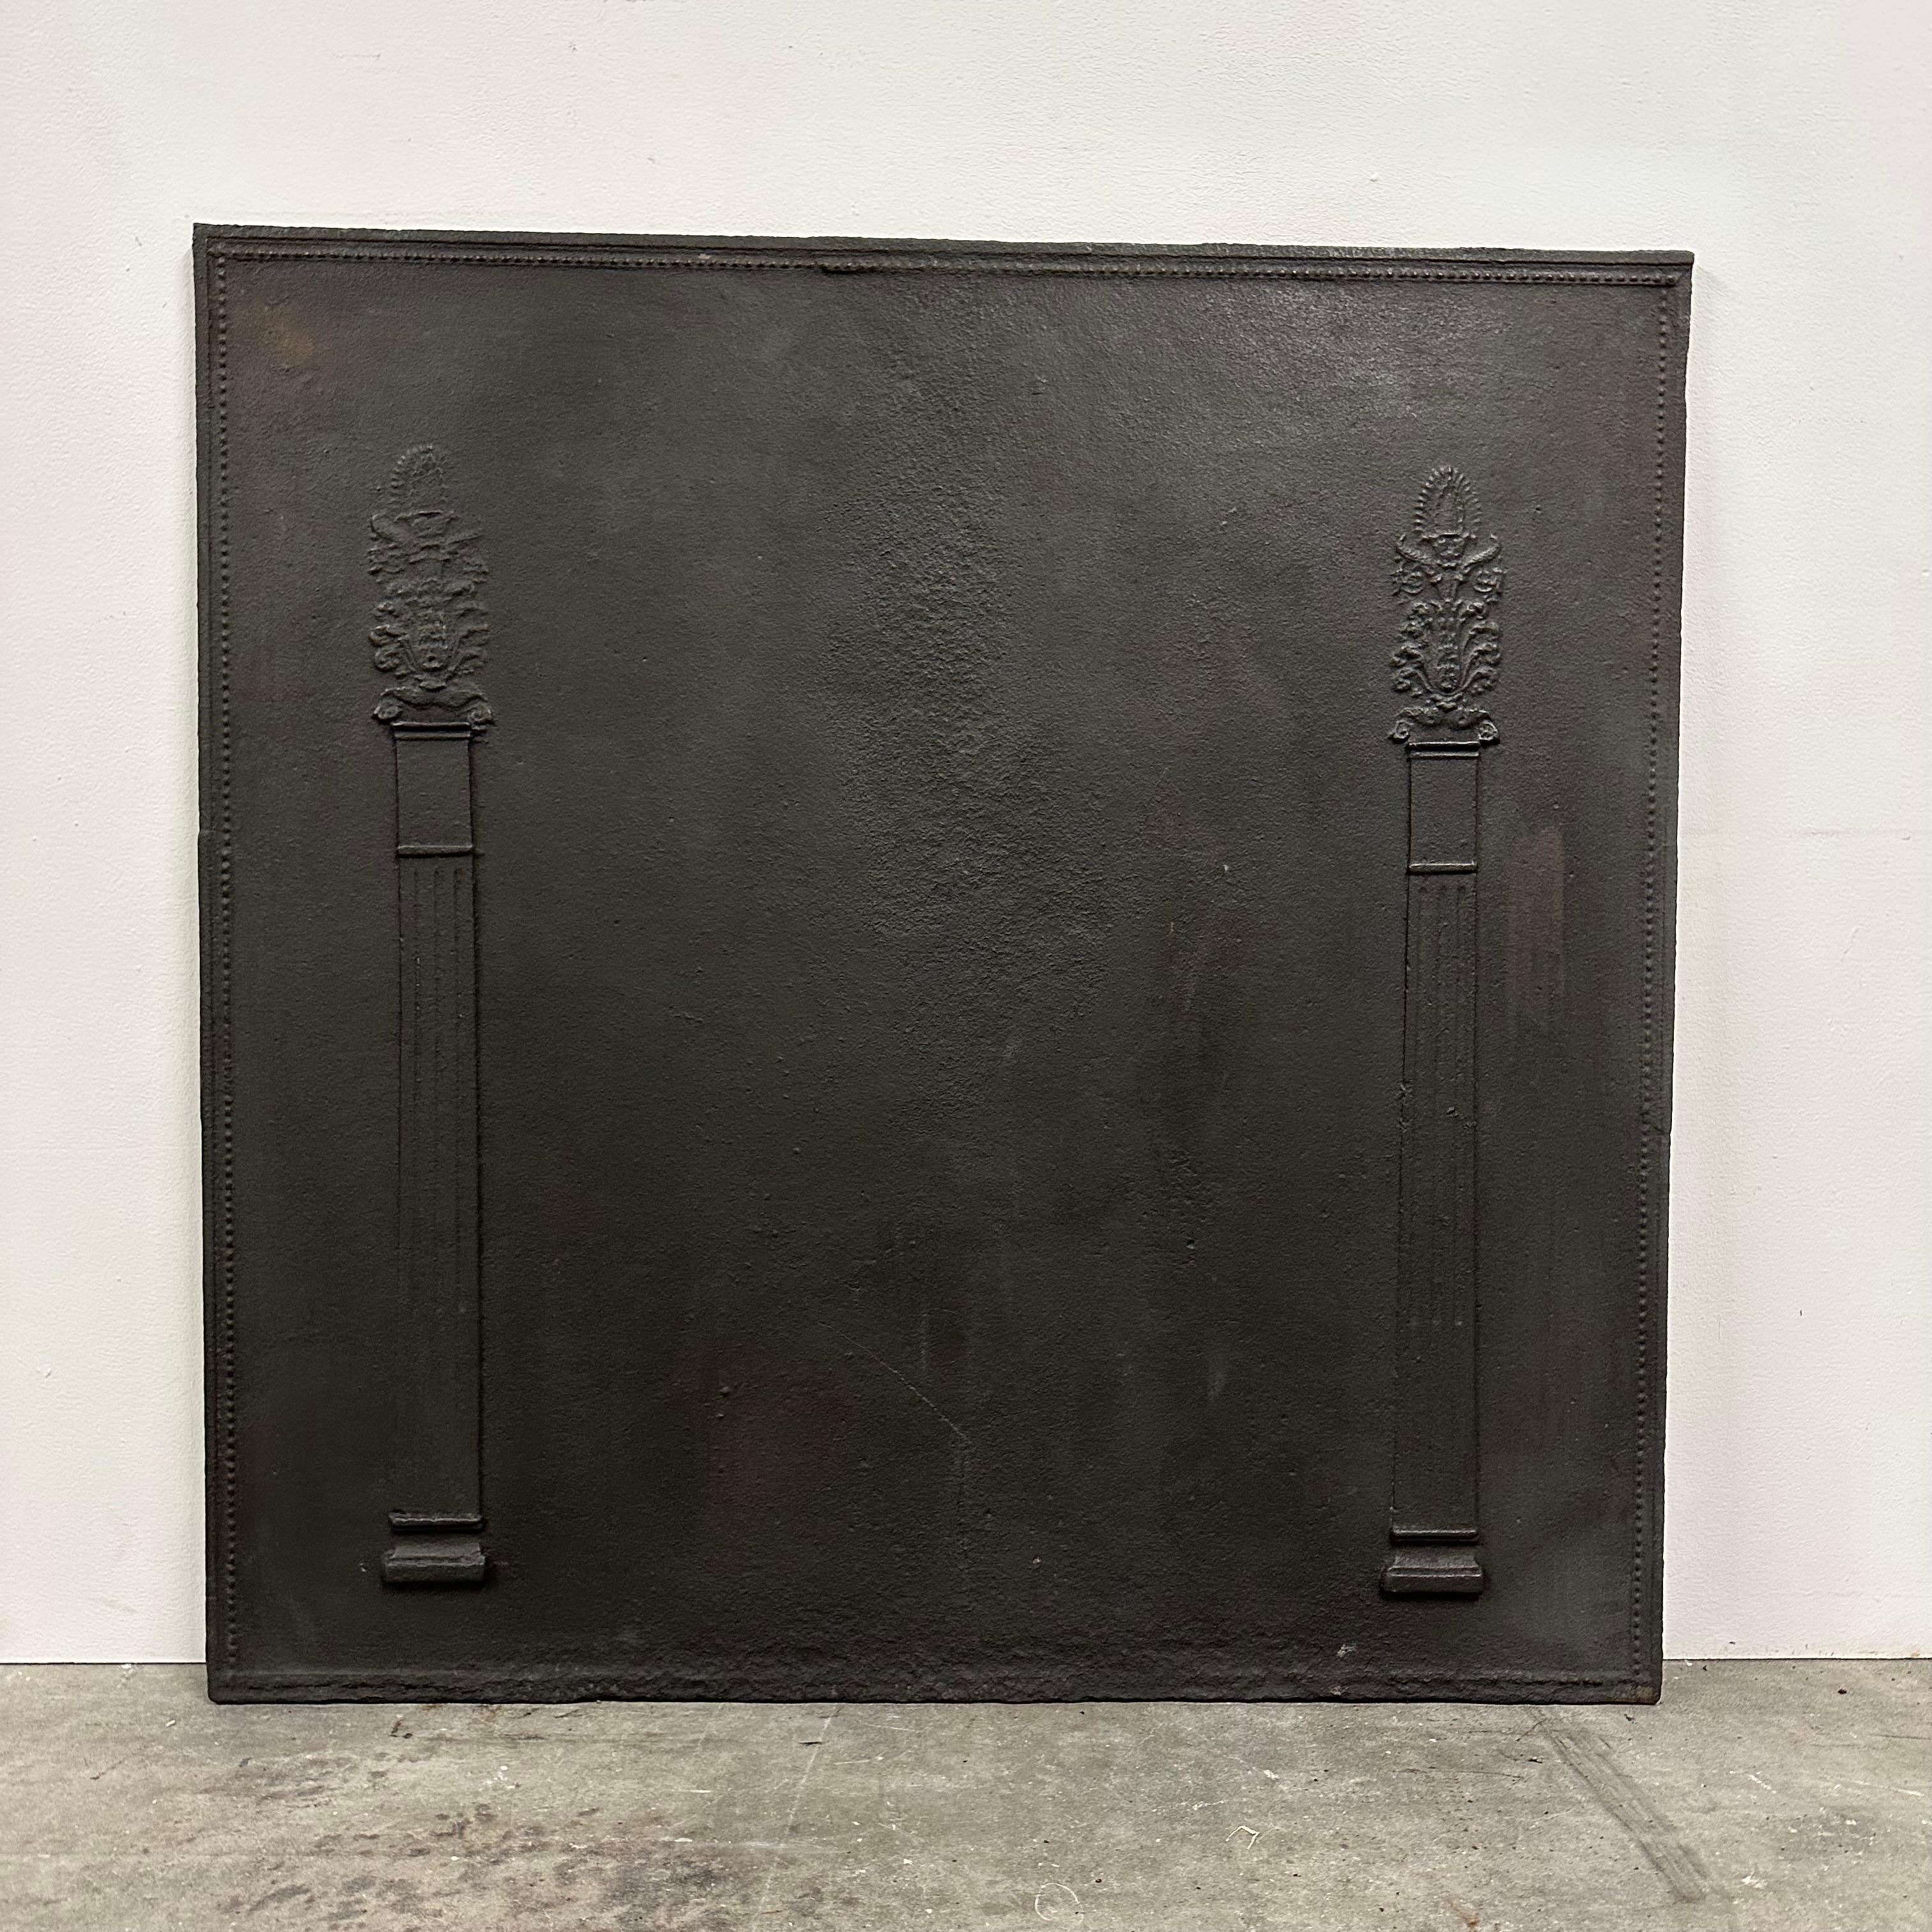 Beautifully detailed and large antique cast iron fireback.

This fireback shows very well detailed architectural columns with decorative finials.

Excellent condition, very usable dimension.
Can be placed in a fire or as an eye catching